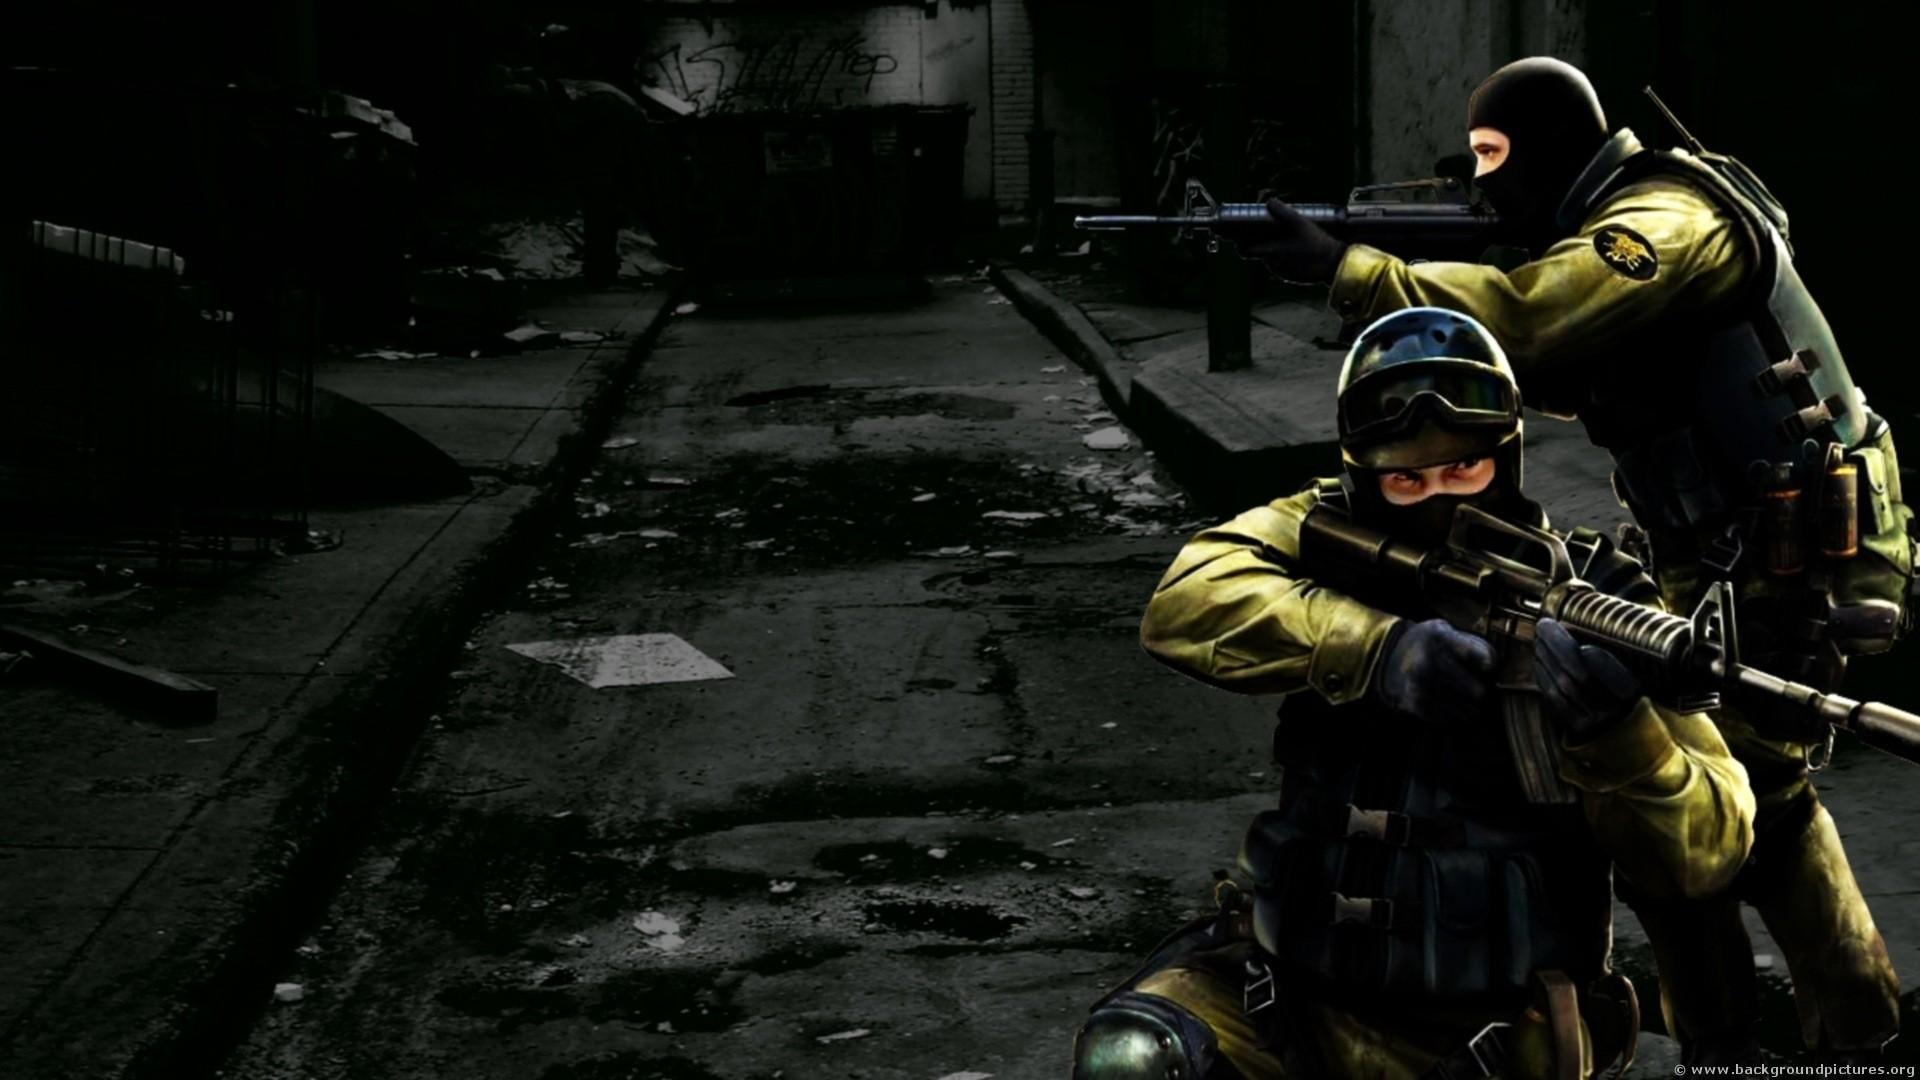 cs go wallpaper,pc game,soldier,military,shooter game,action adventure game